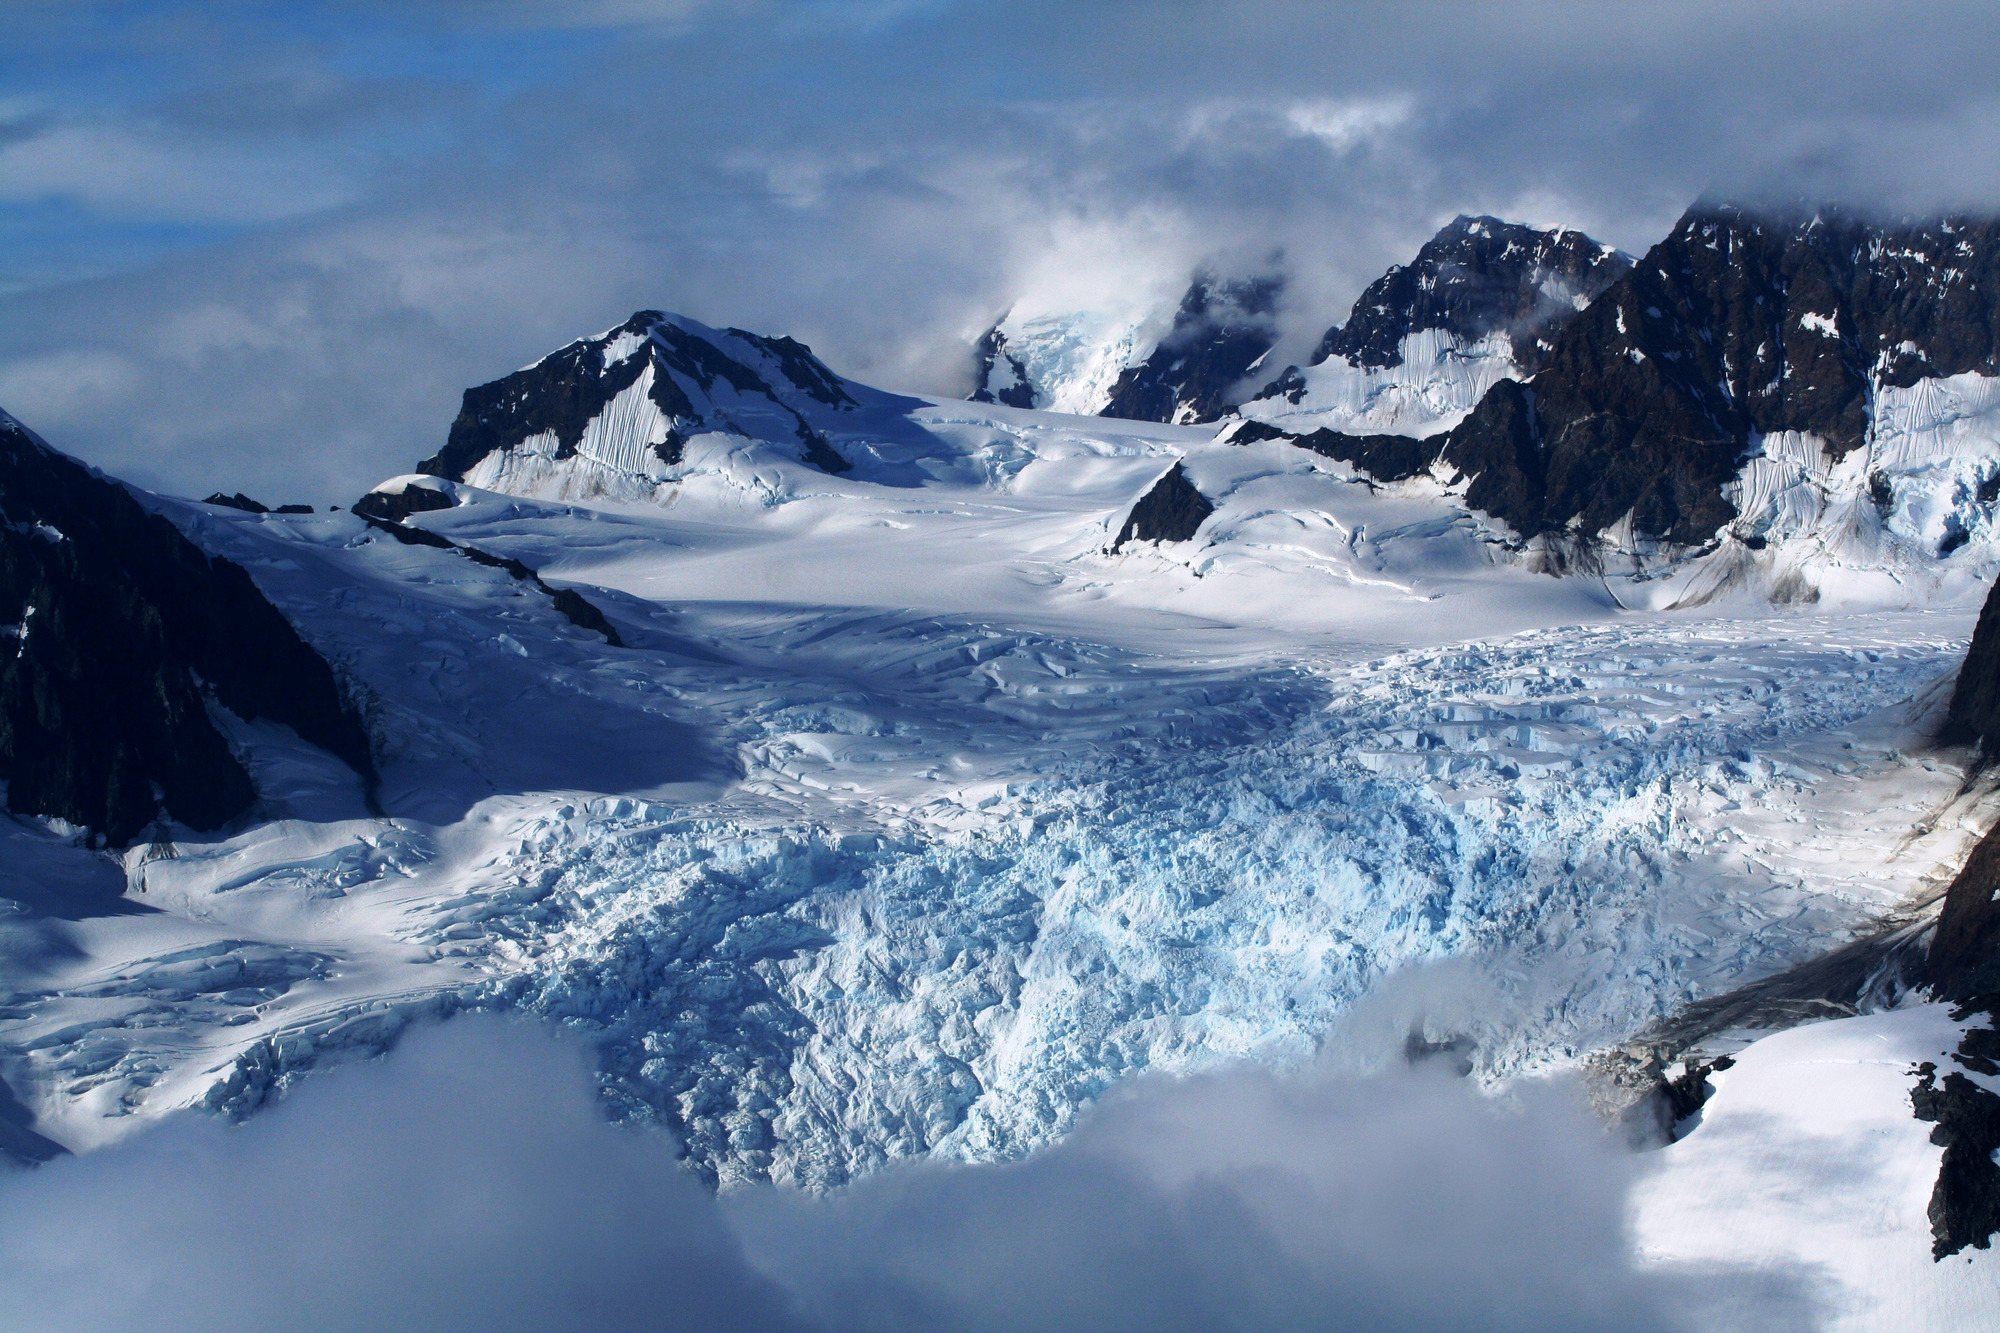 Glacier is covered in patches by fog and clouds